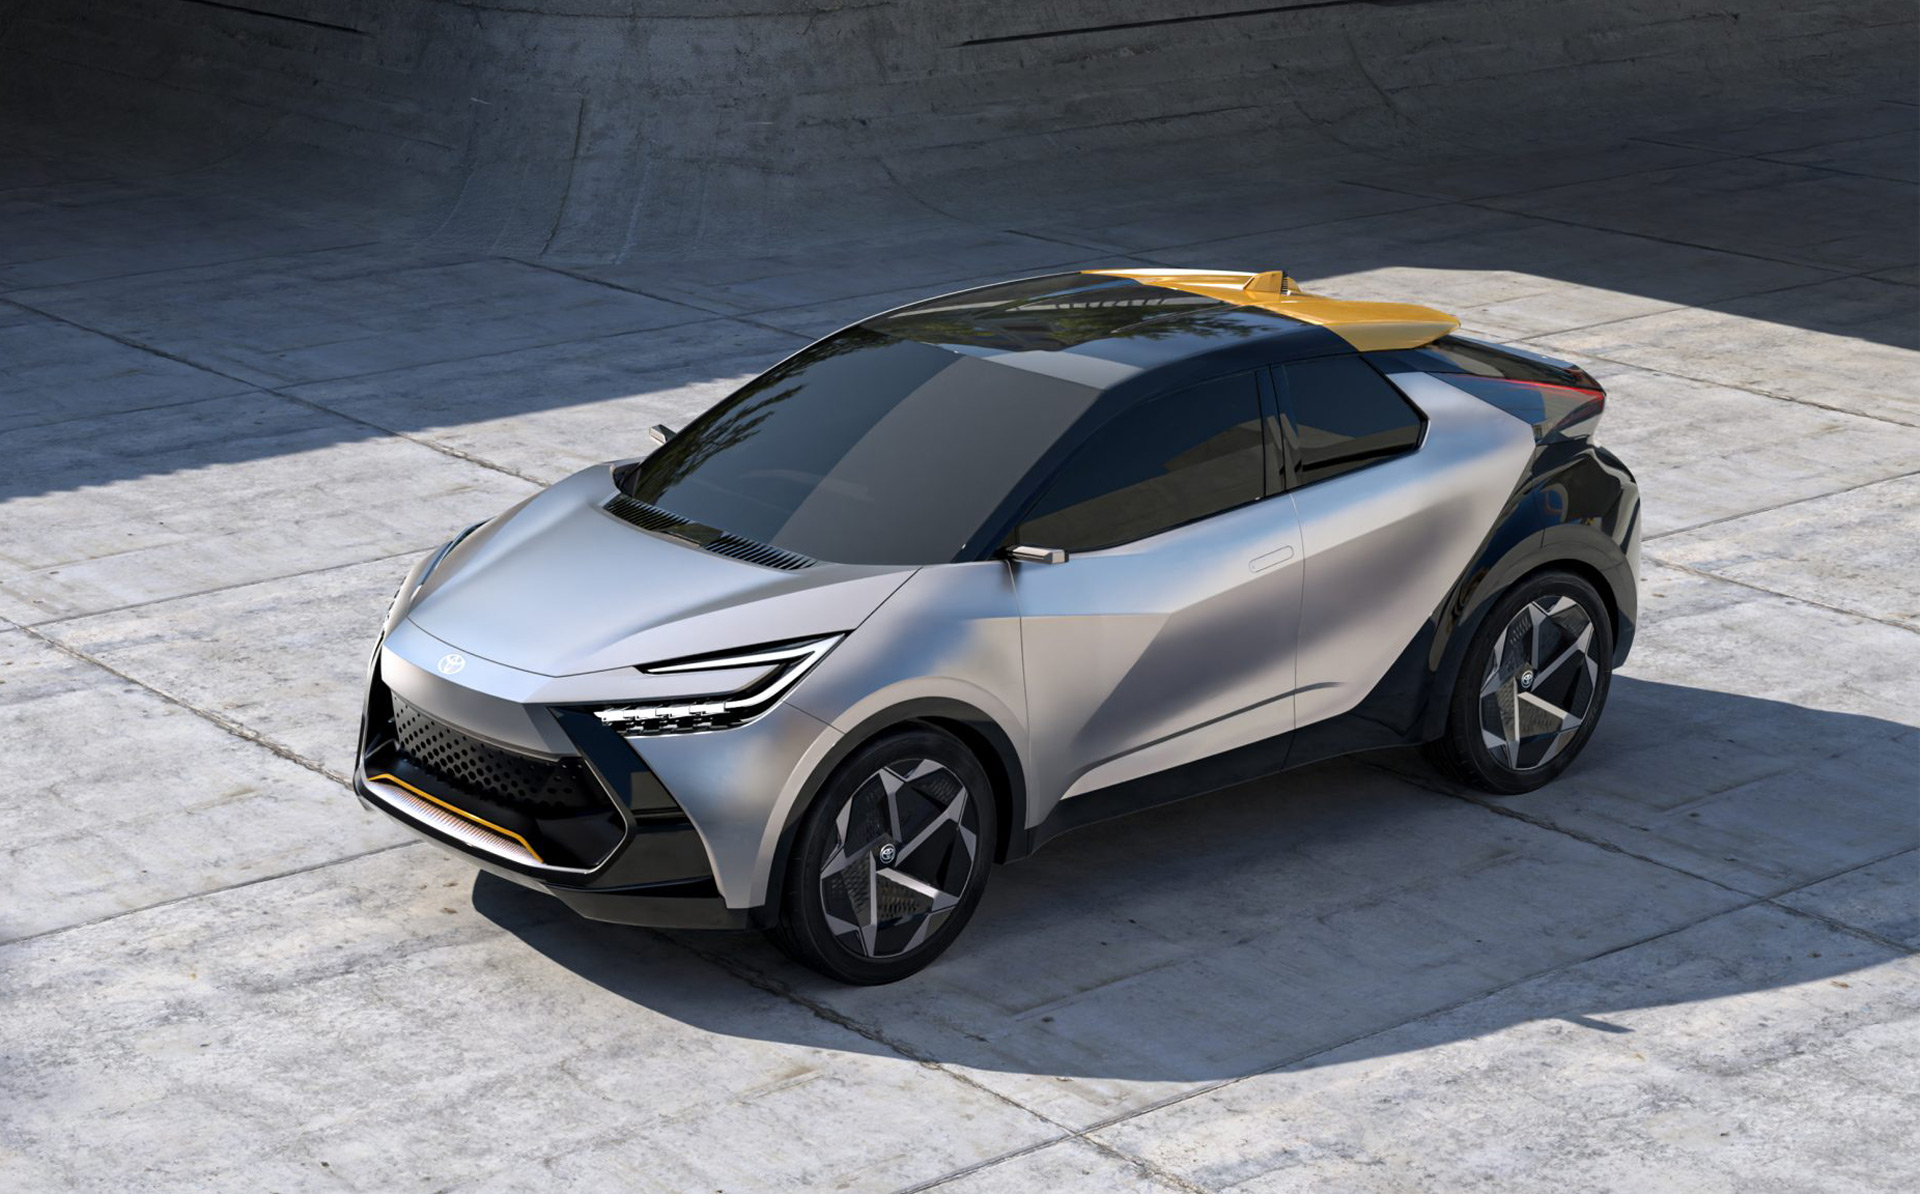 2024 Toyota C-HR Speculatively Rendered Based On Prologue Concept